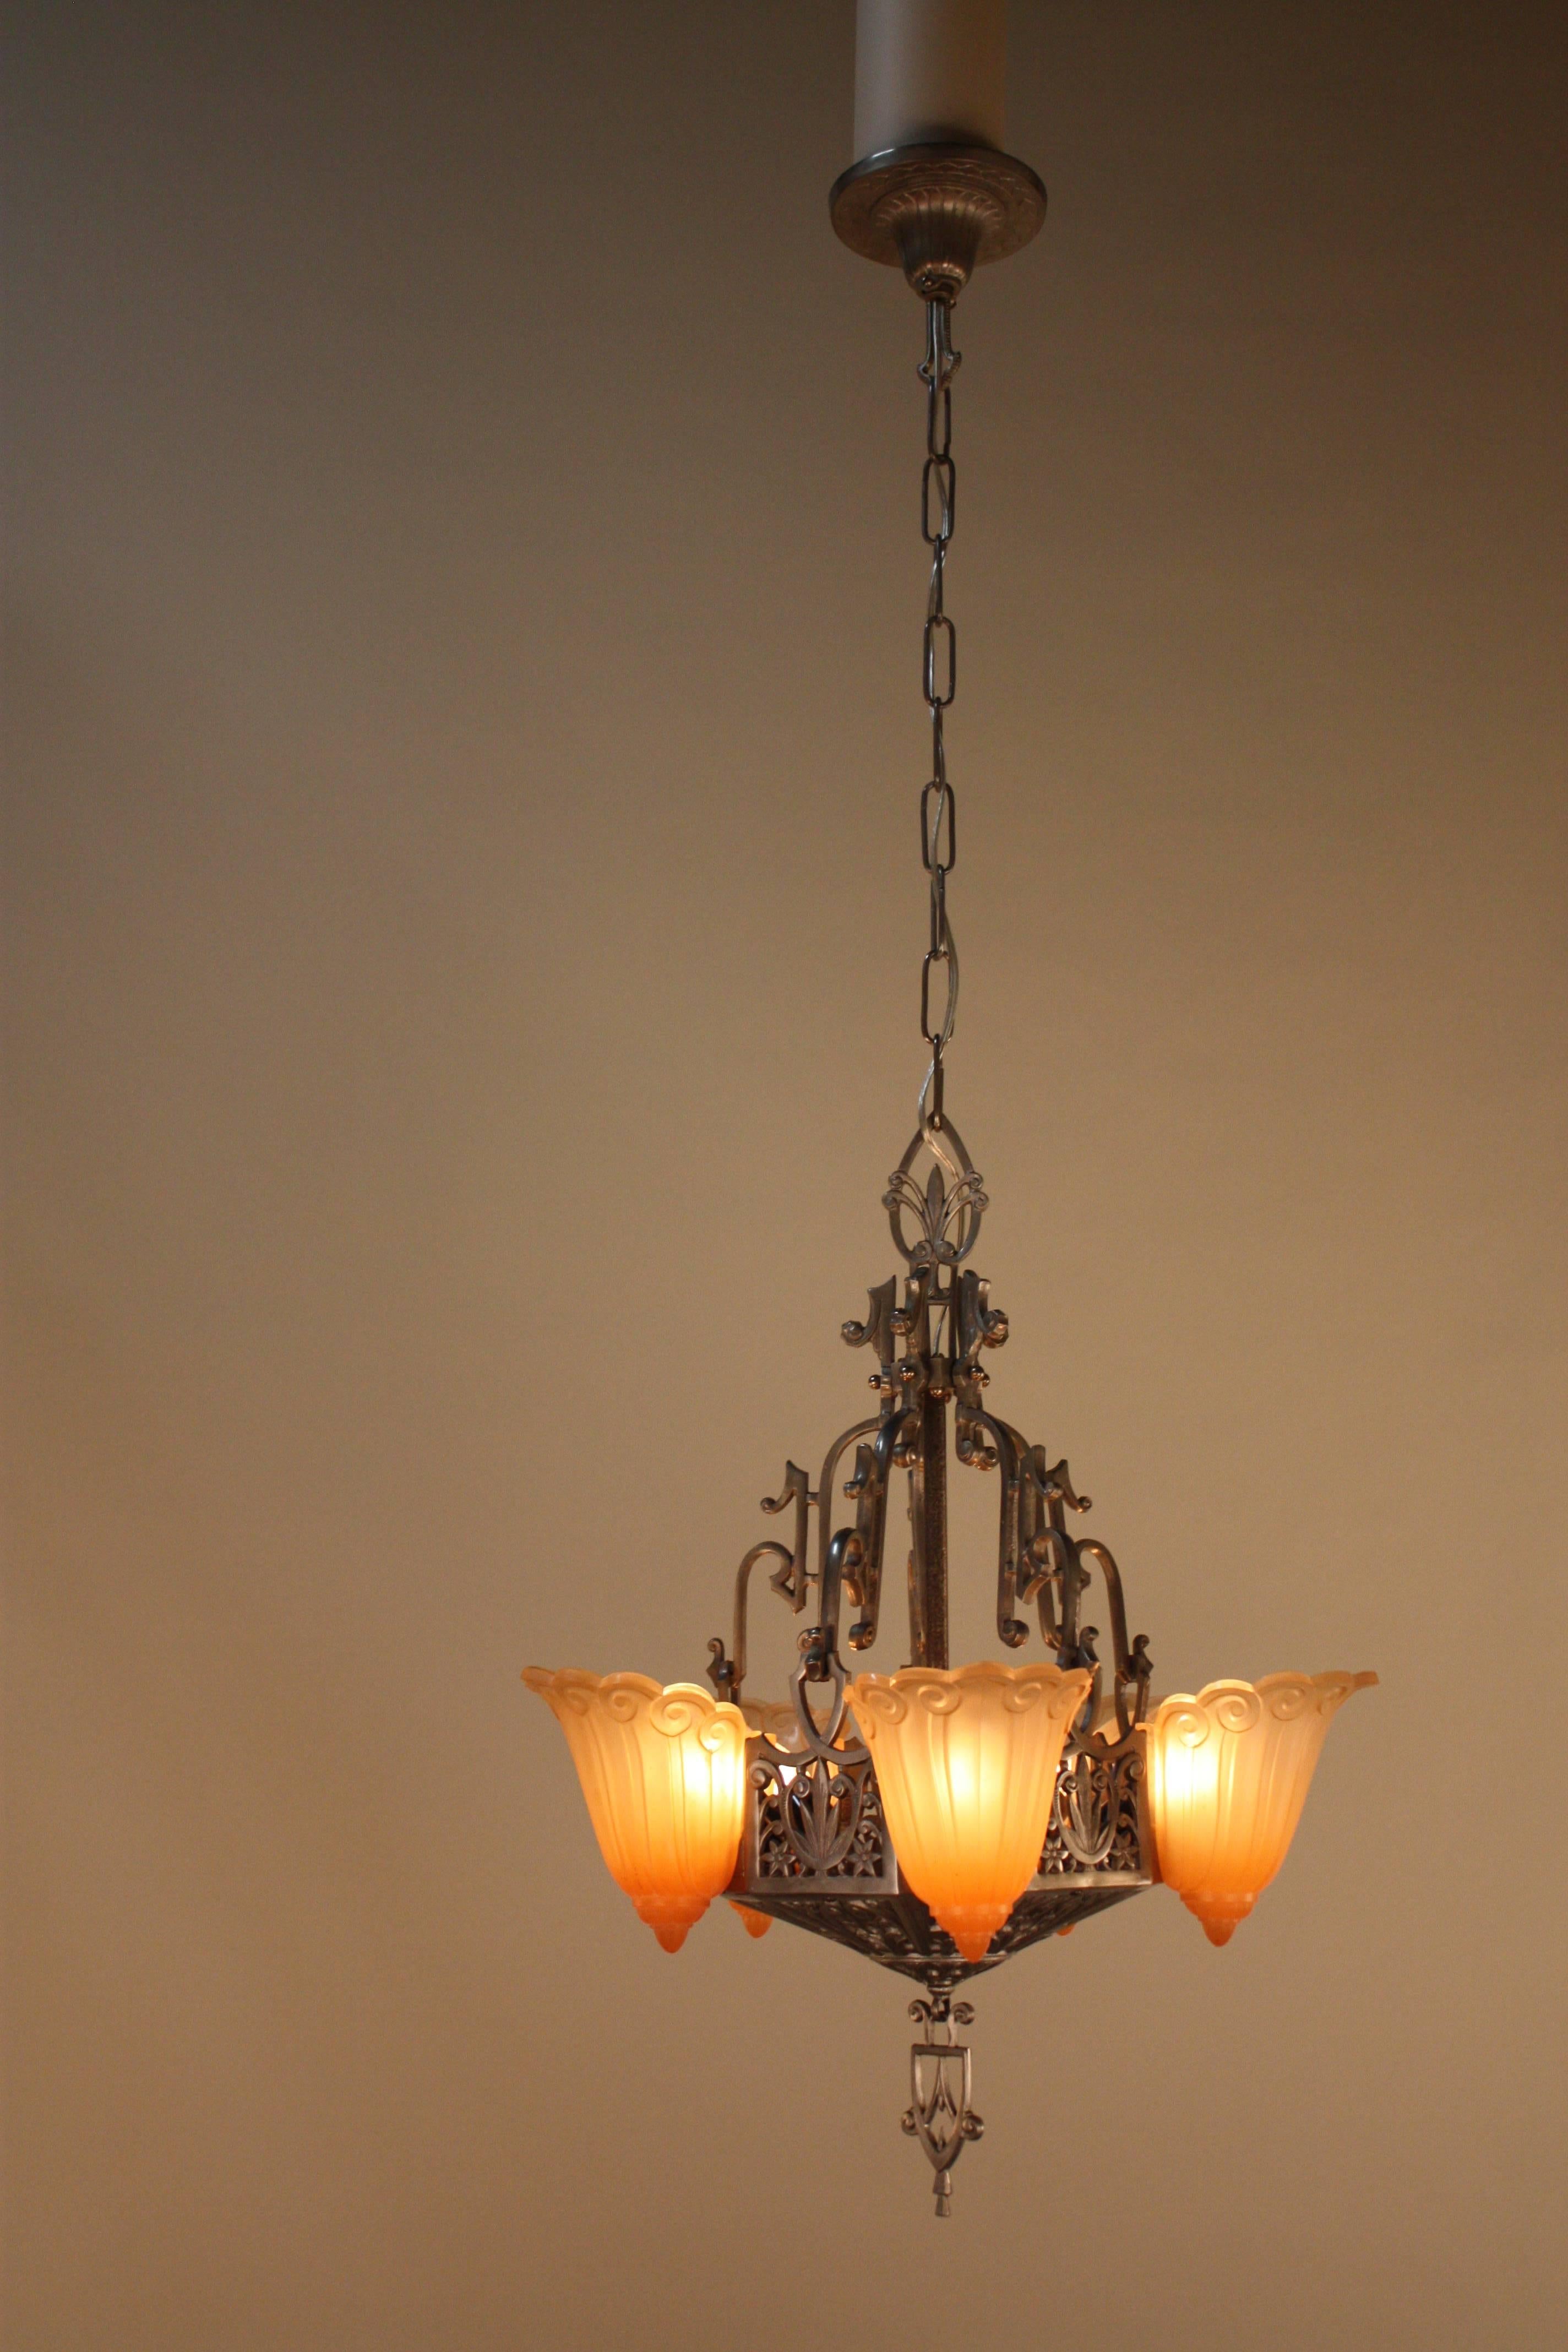 Five-light American slip shade chandelier with beautiful warm orange color shade and pewter color metal frame.